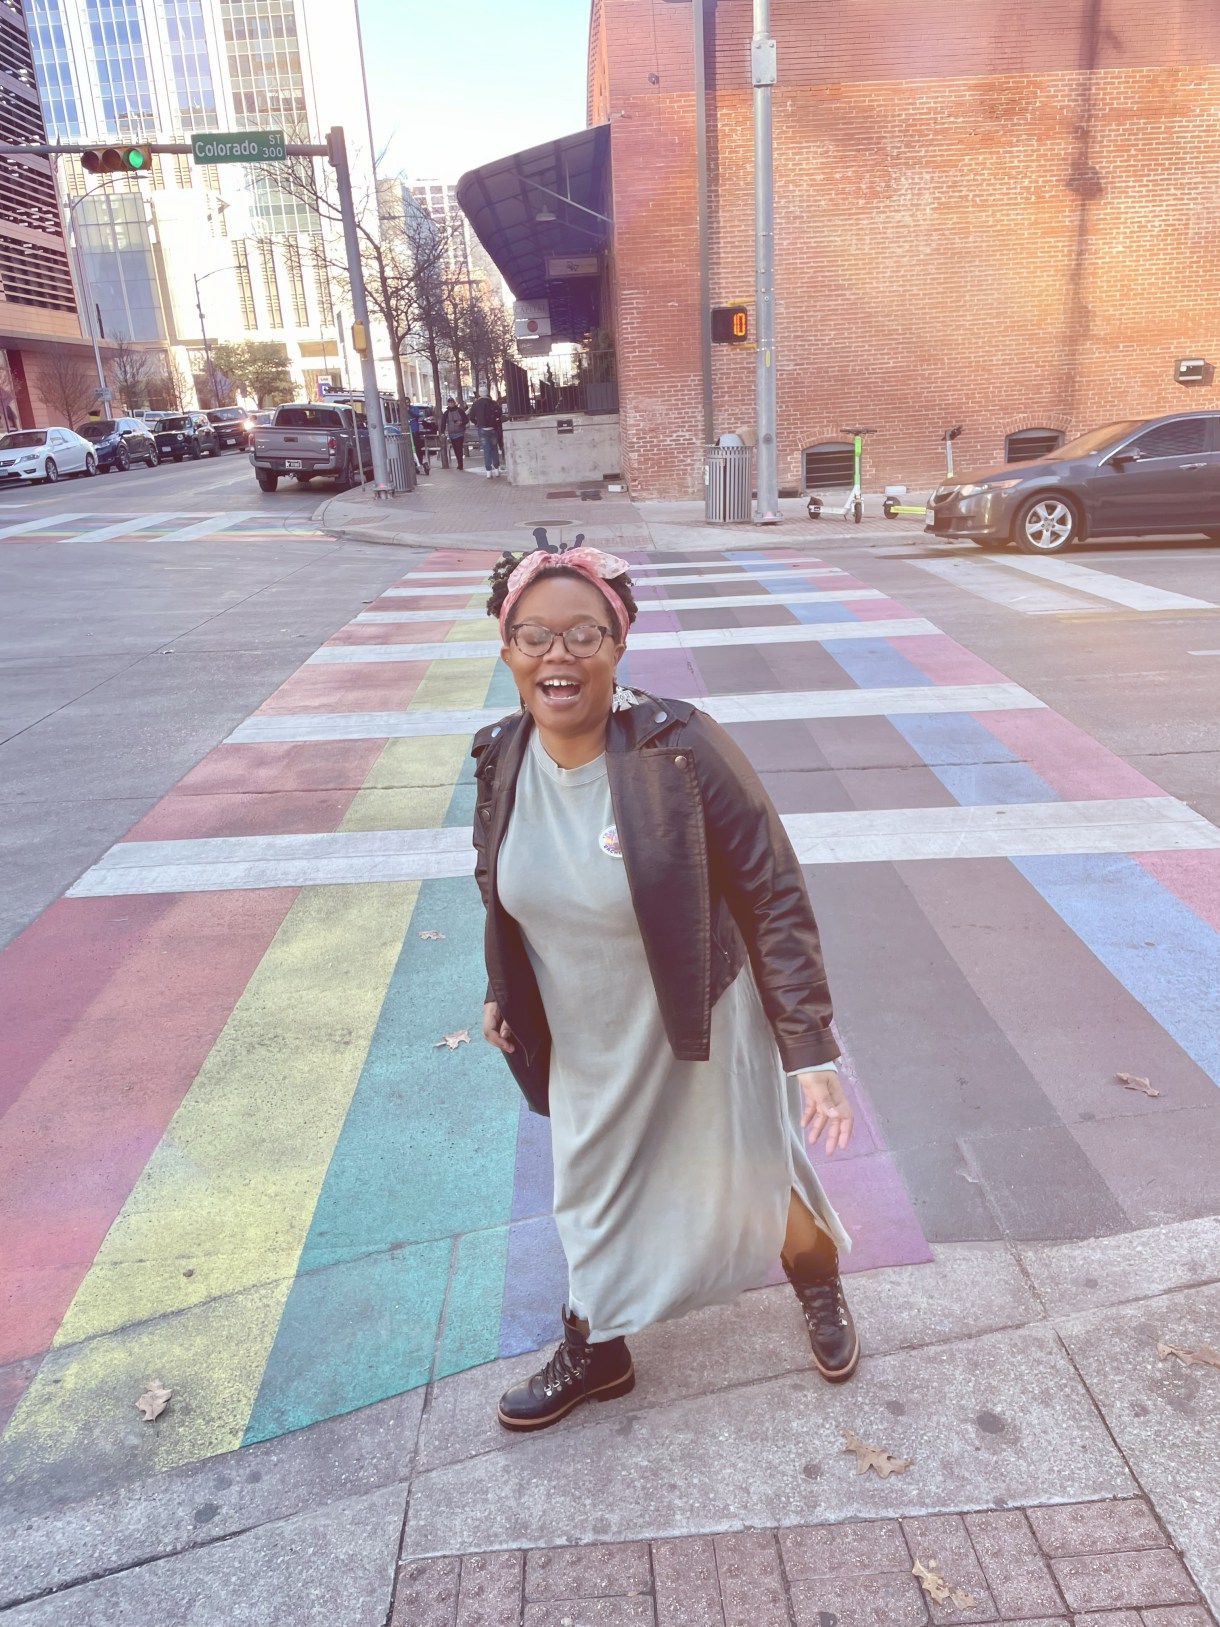 Carmen, a Black woman wearing a dress and jean jacket exclaims joyfully on the edge of a rainbow flag crossing at an intersection.